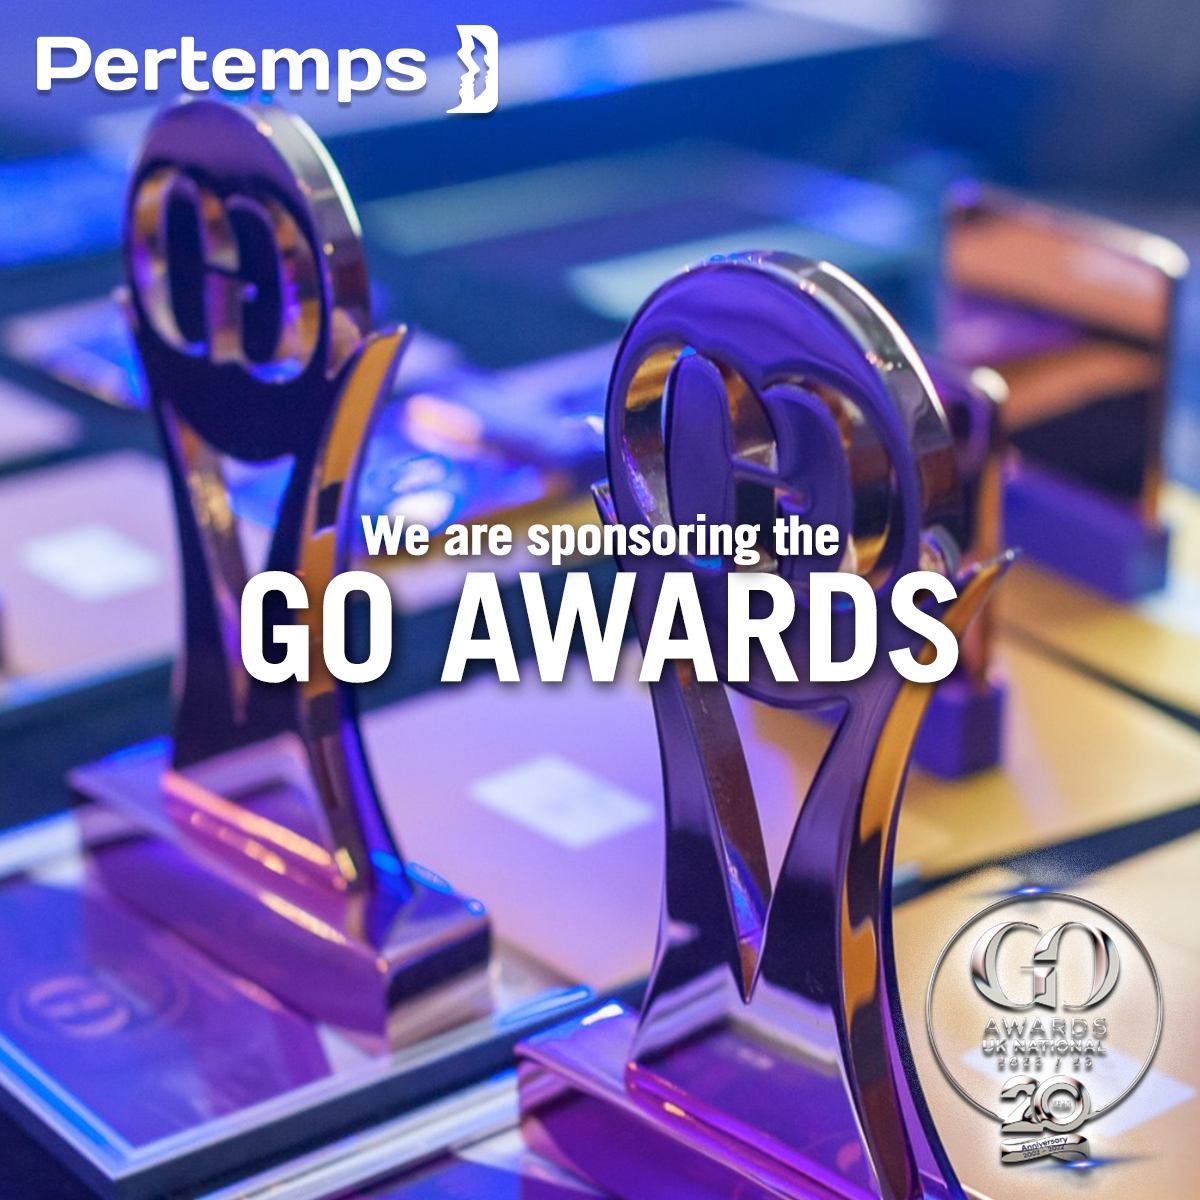 We're proud to announce that Pertemps are sponsoring the 2022/2023 UK National @GOAwardsNews! Stay tuned for exciting updates. 🏆 👏🍾 #GoAwards #PertempsSupports #Procurement #Buyers #Pertemps